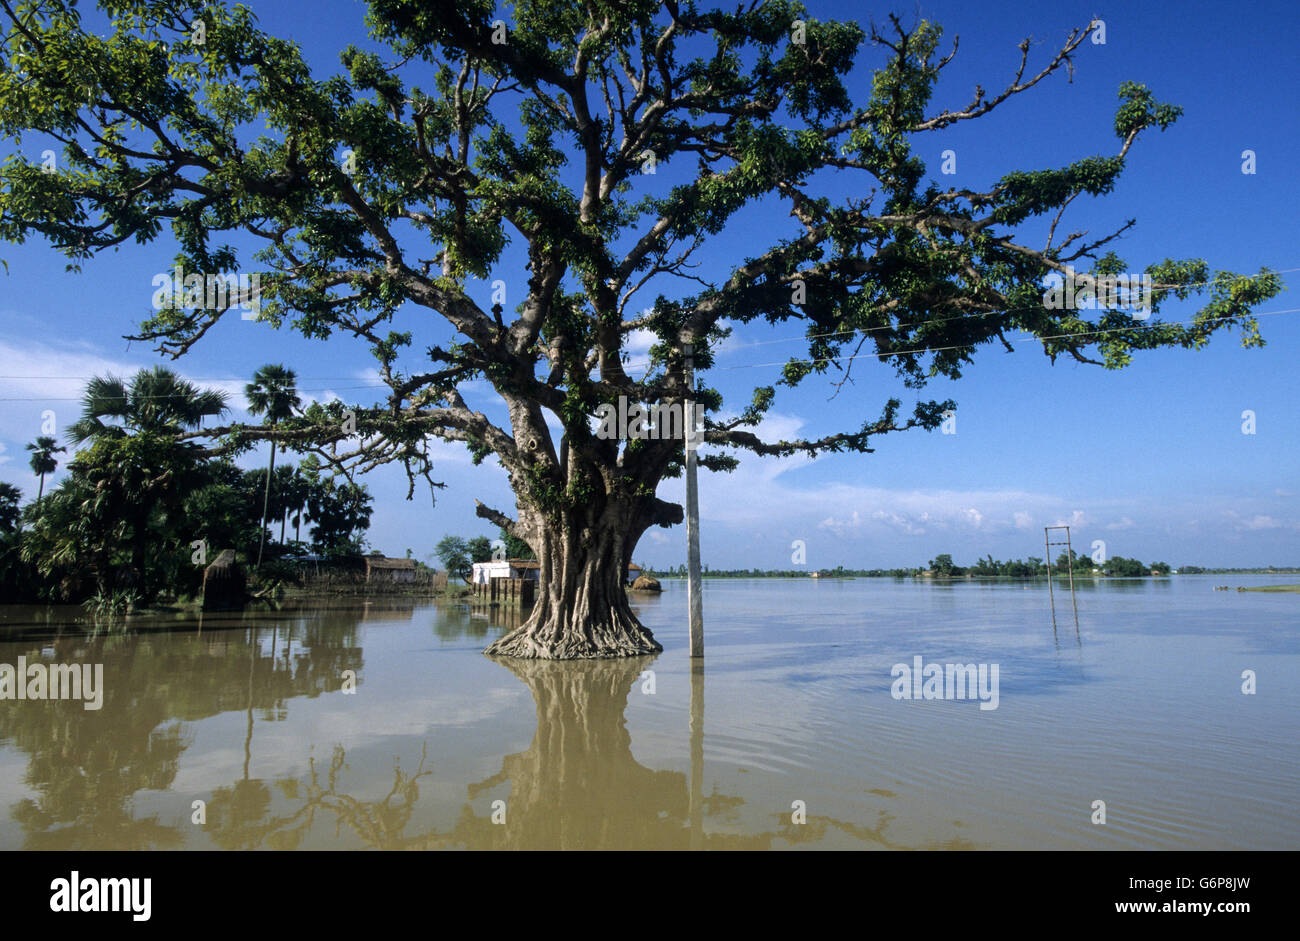 India Bihar , submergence at Bagmati river a branch of ganges due to heavy monsoon rains and melting Himalaya glaciers, big tree in water Stock Photo